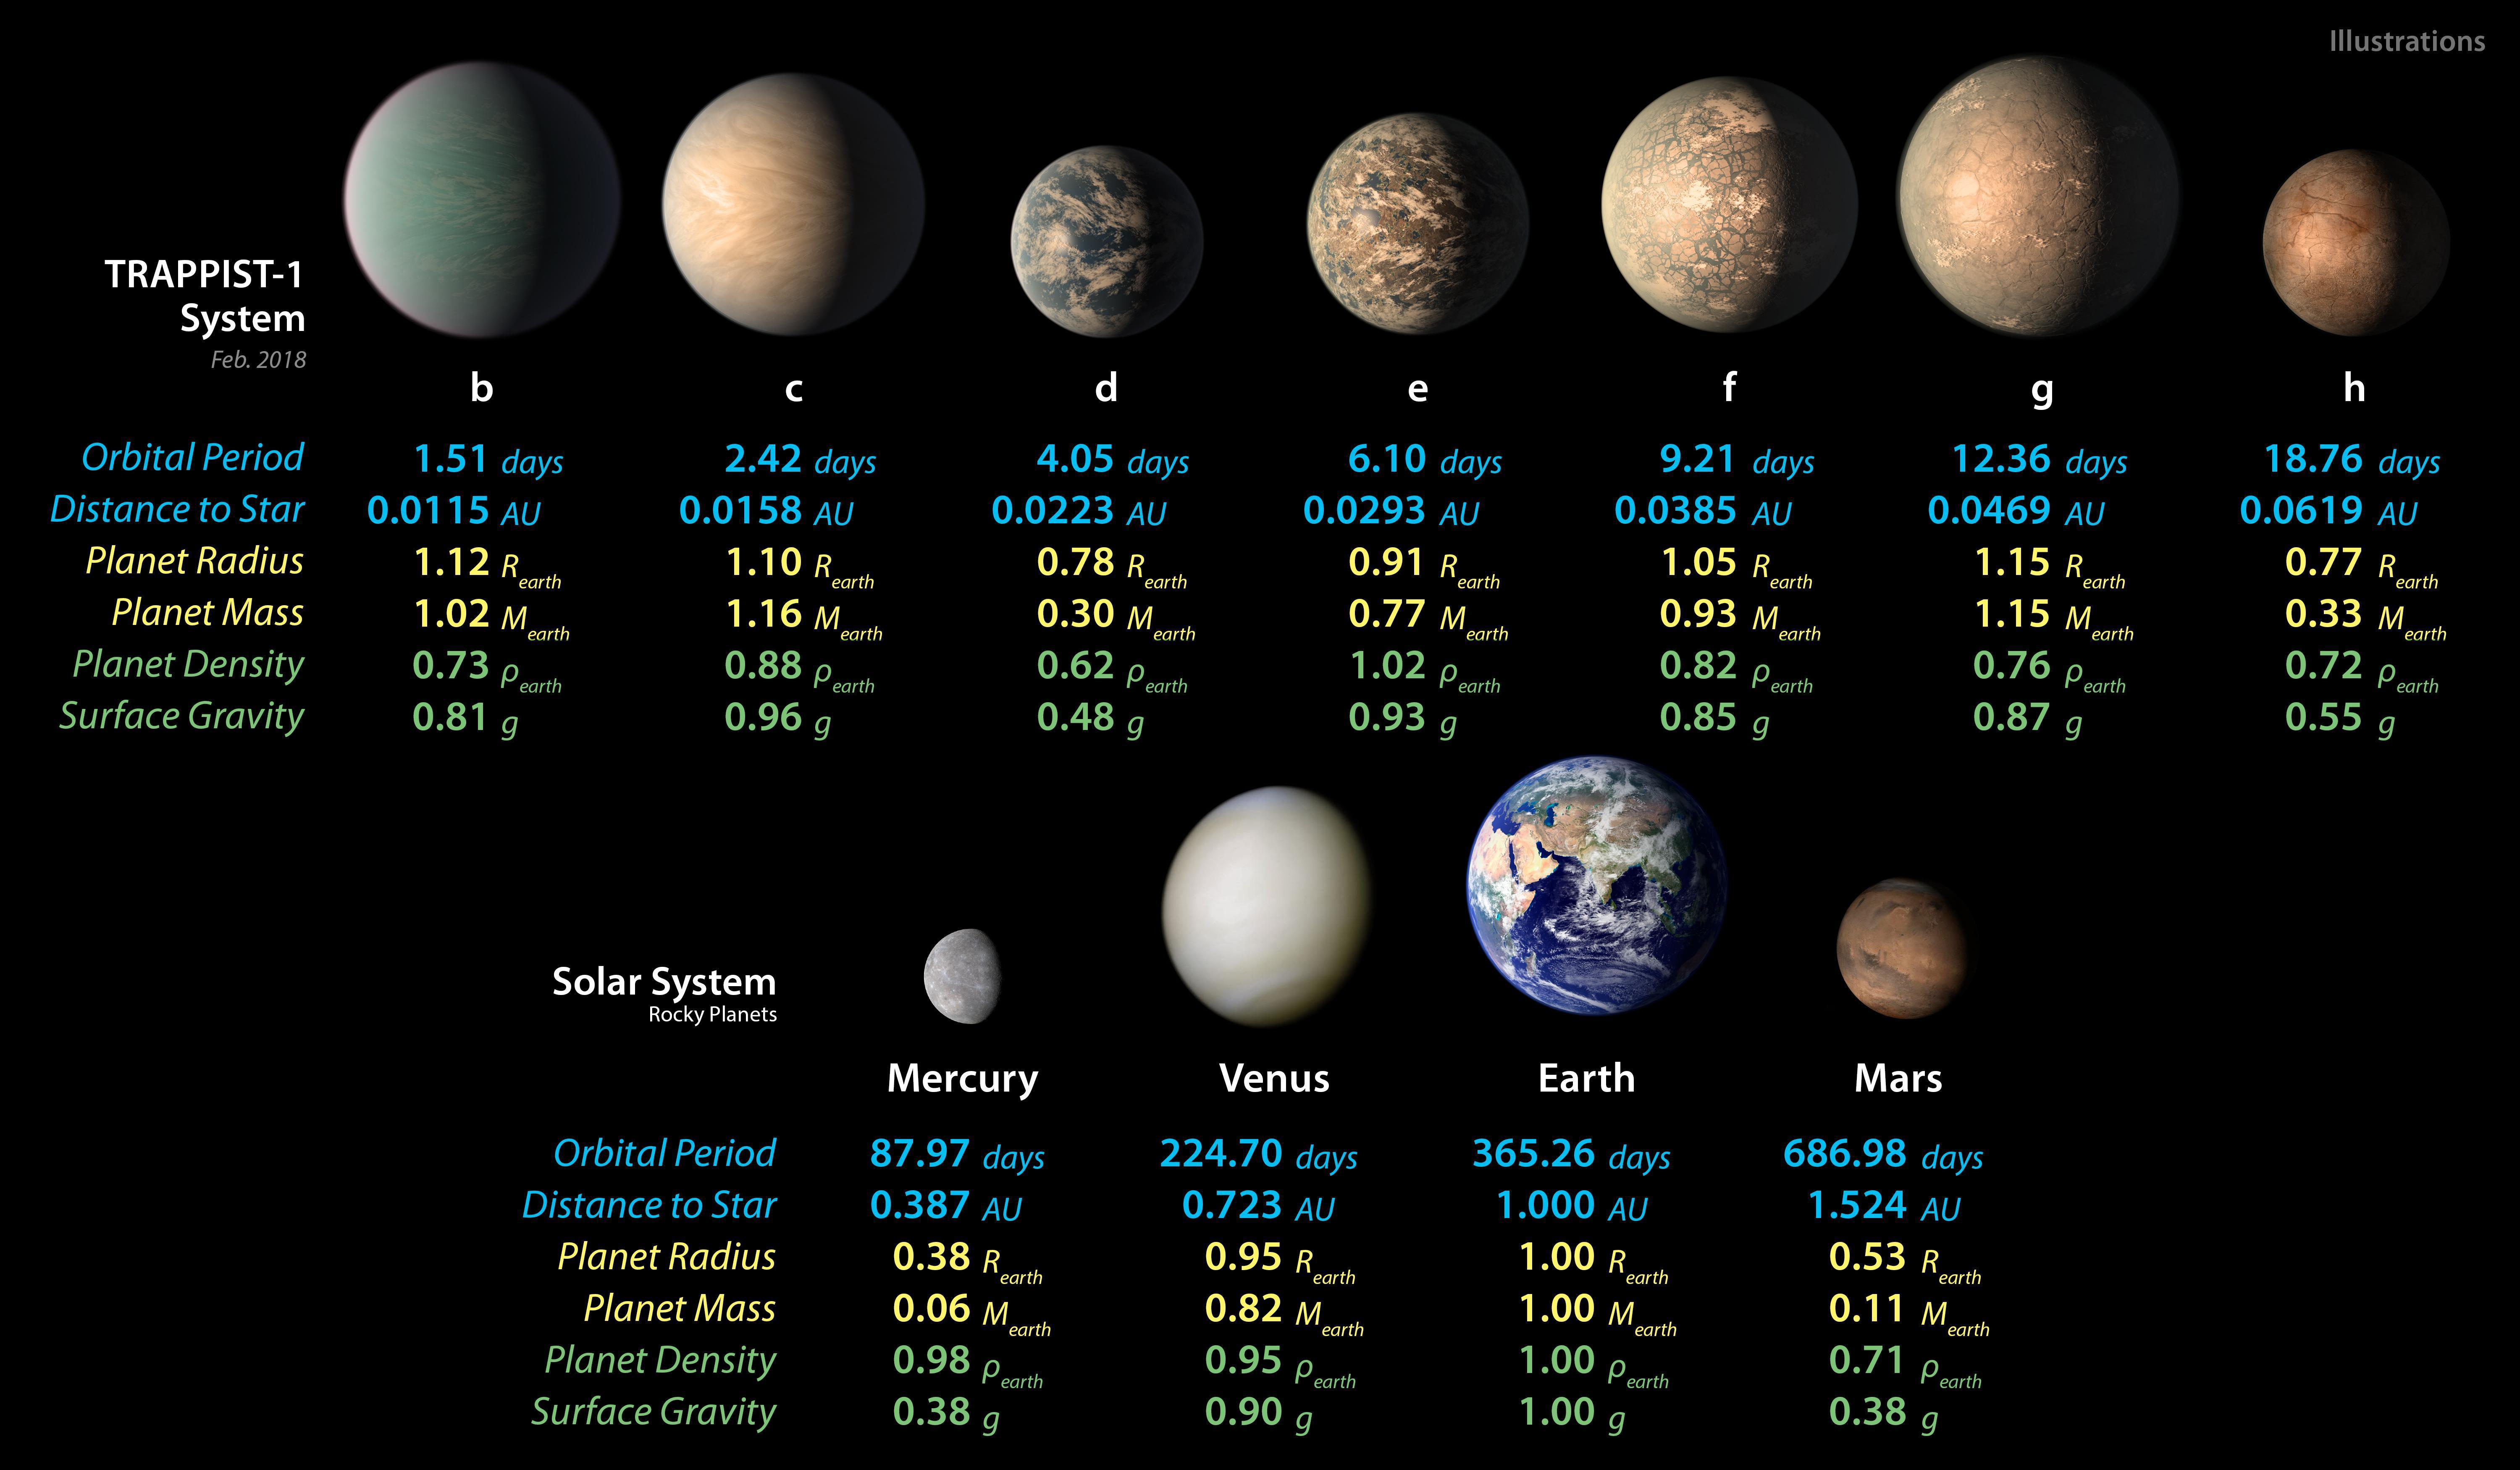 the diameter of planets